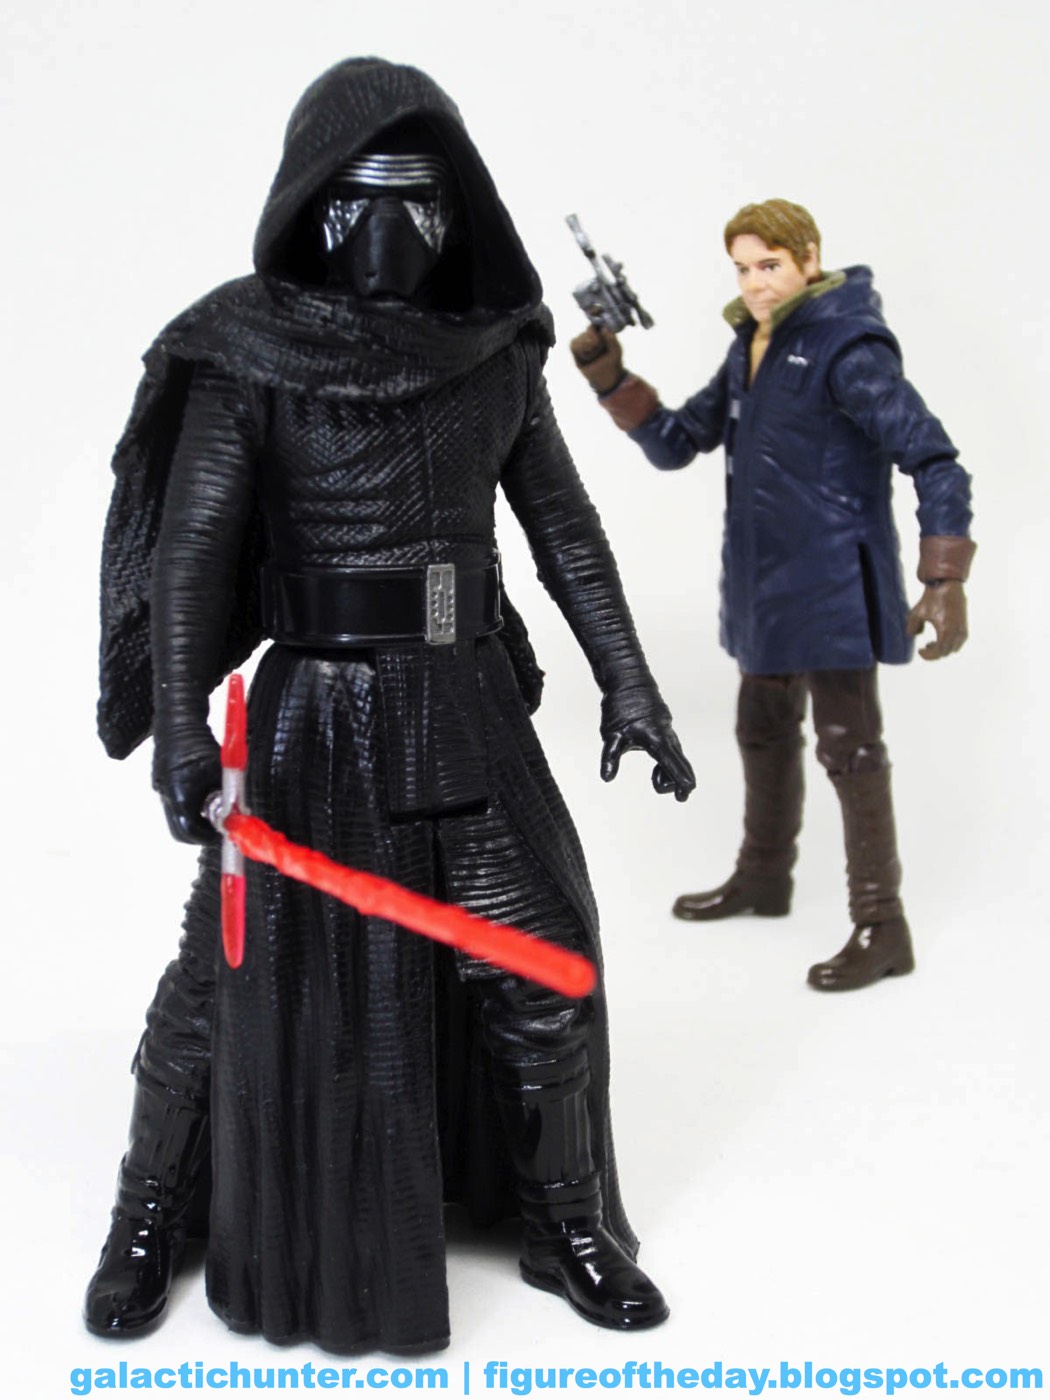 Kylo Ren Star Wars Rogue One Hasbro 2016 3.75 Inch Action Figure B8609 for sale online 